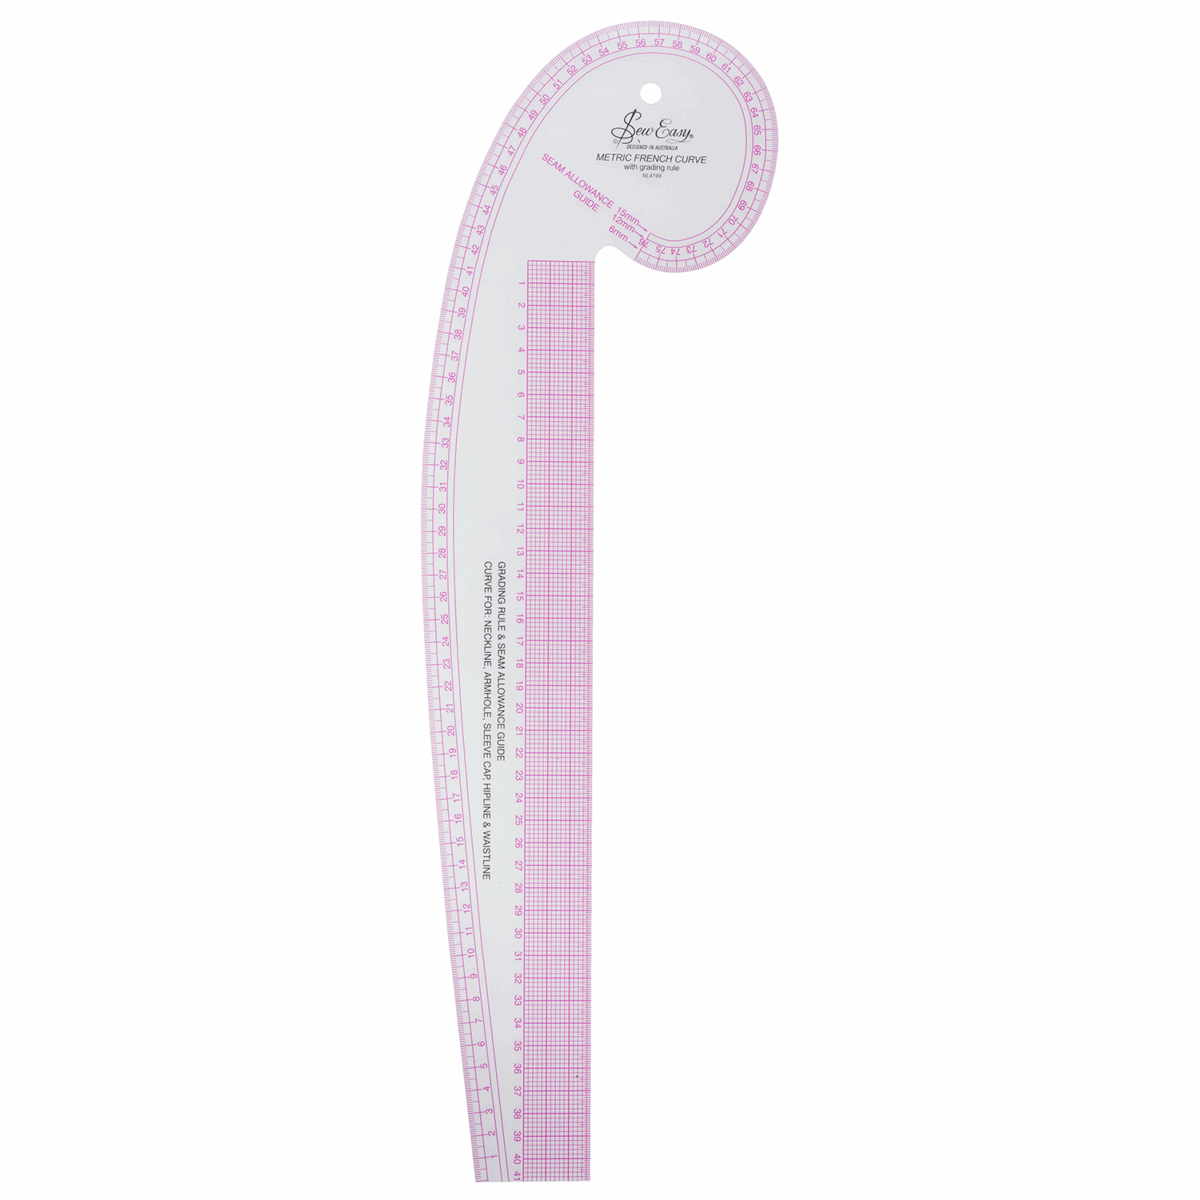 Sew Easy French Curve Ruler - Metric